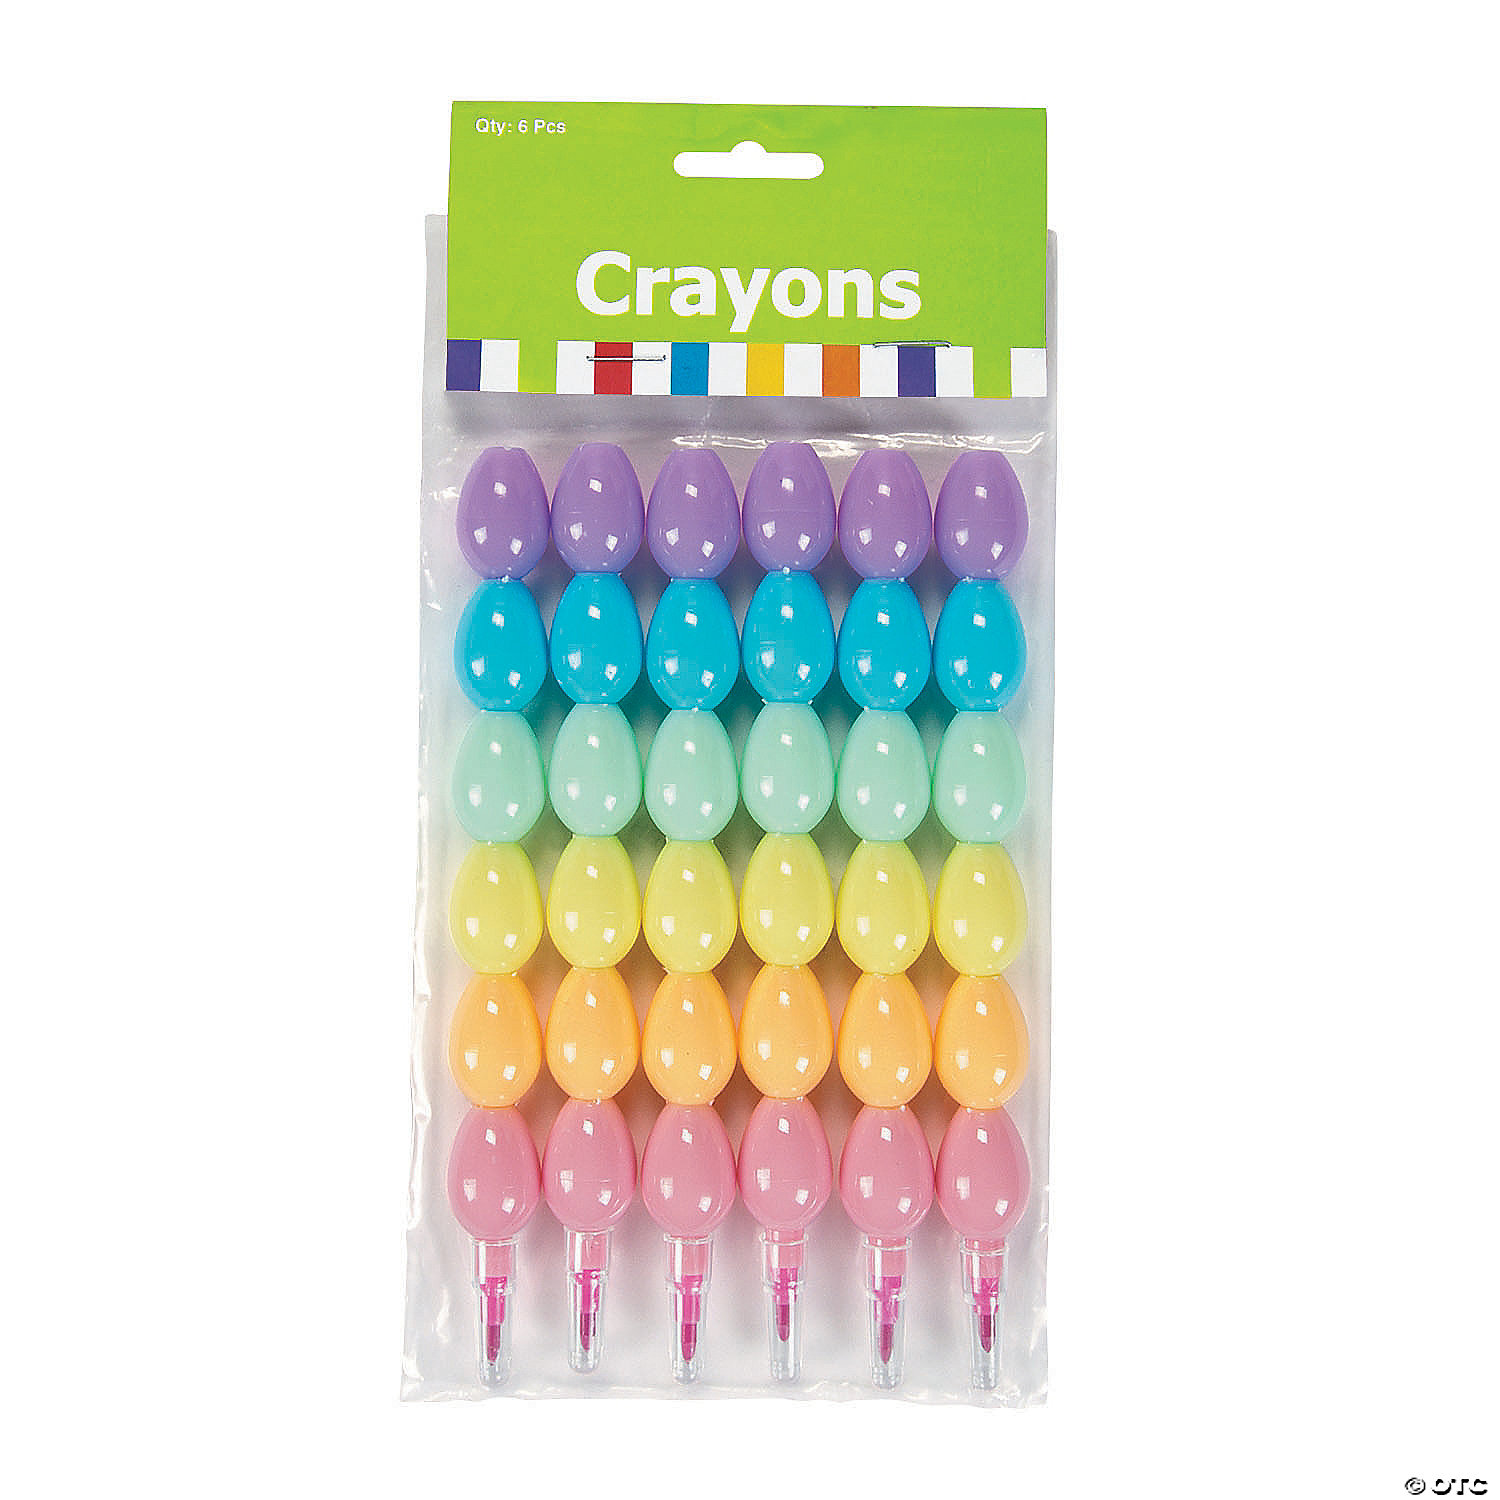 Easter Egg Crayons 